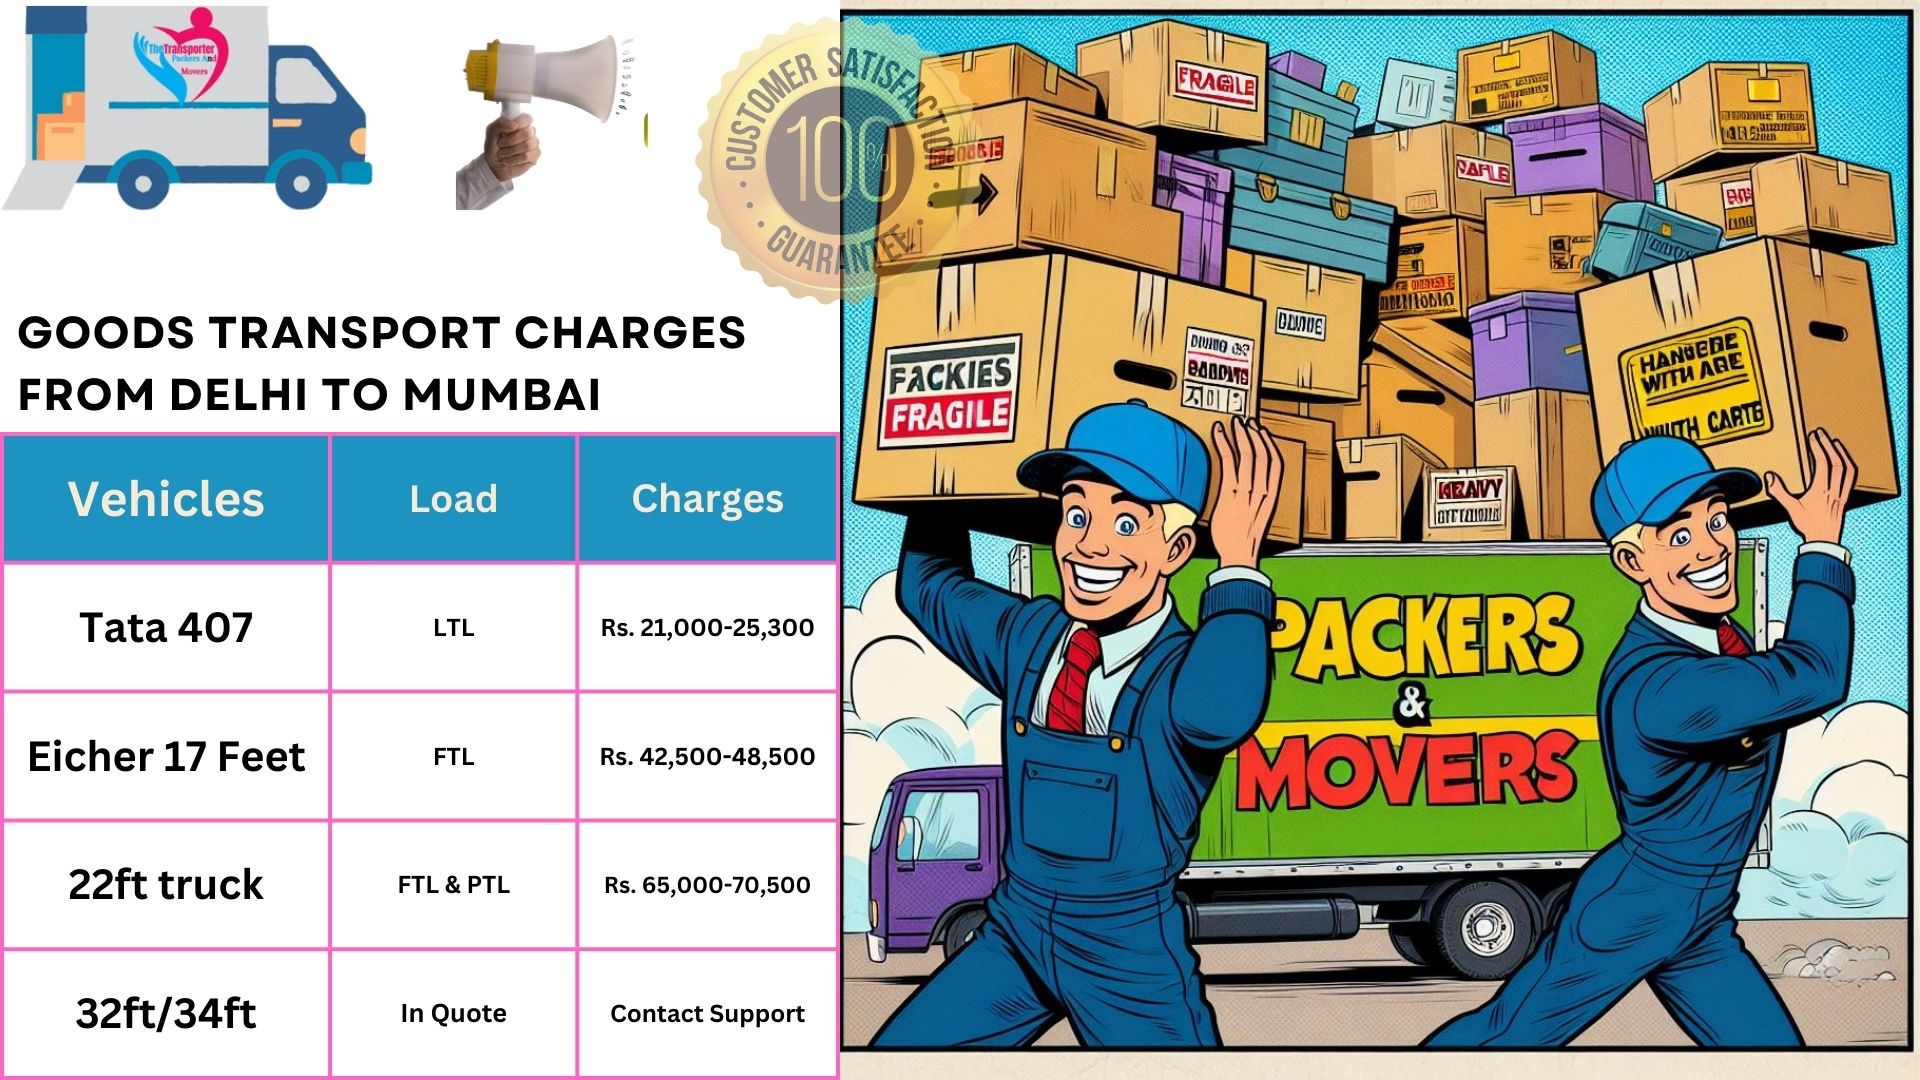 Goods transport charges list from Delhi to Mumbai